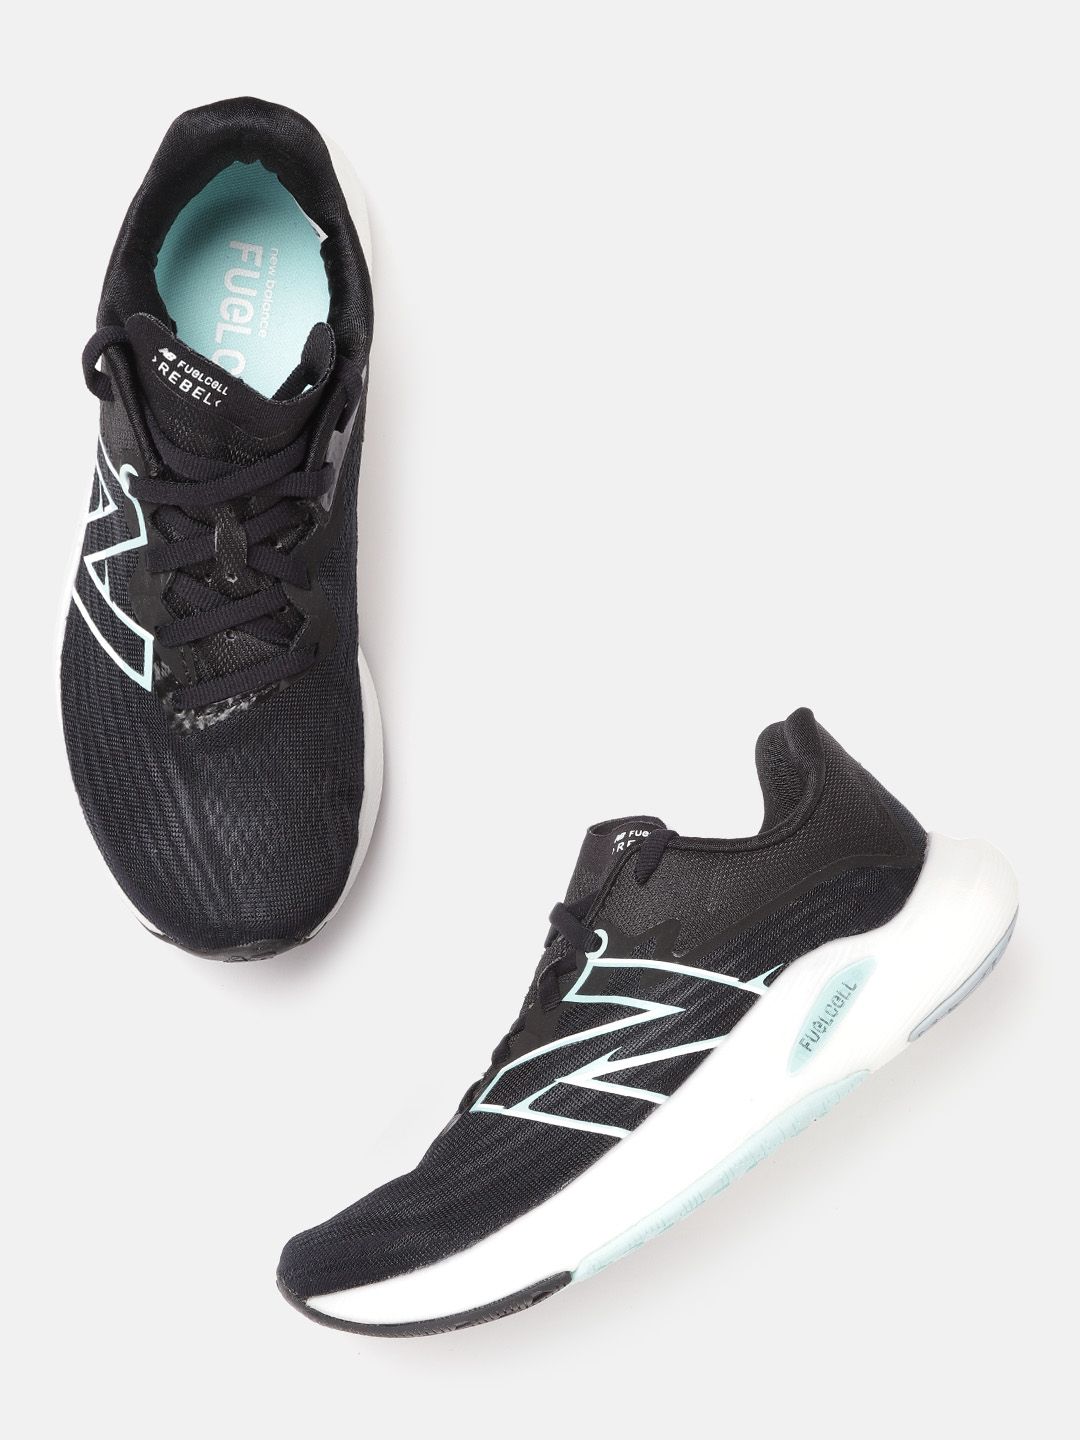 New Balance Women Black Striped Woven Design Running Shoes Price in India